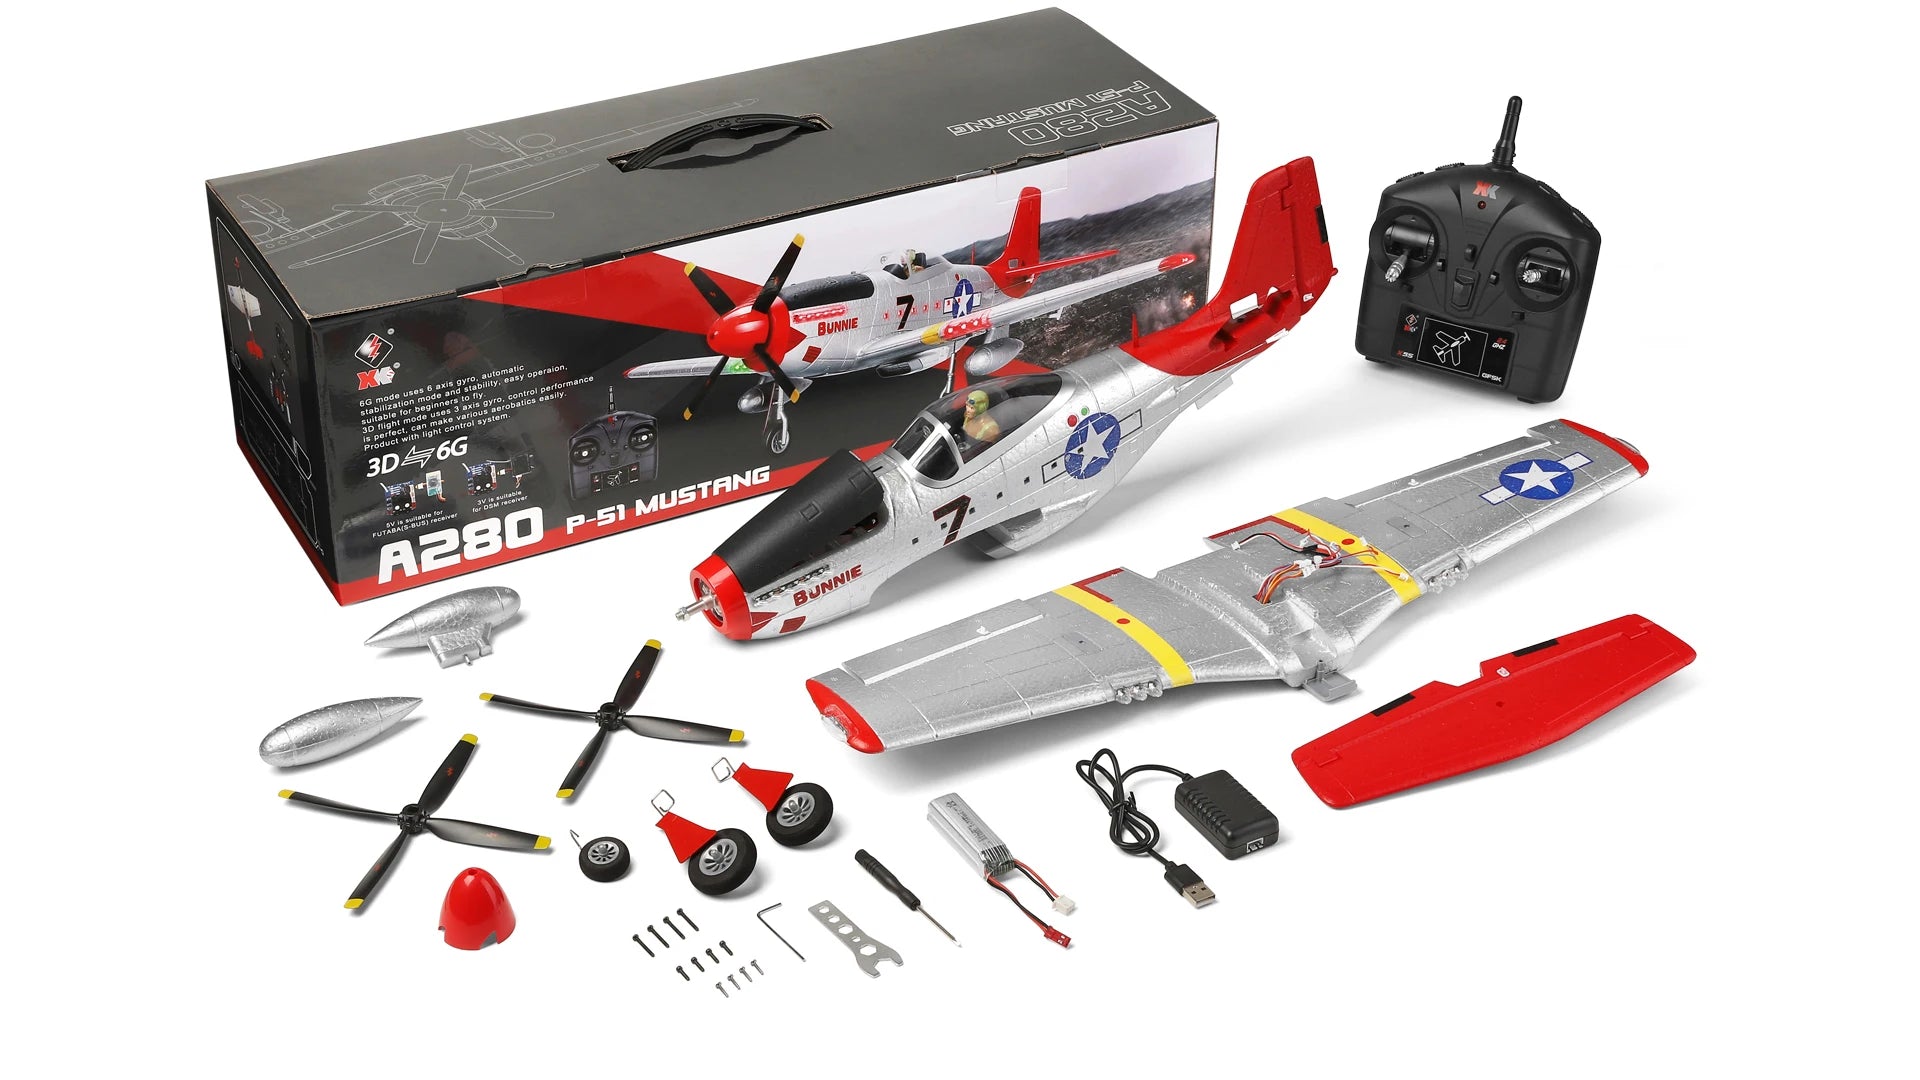 WLtoys A280 Brushless Motor RC Airplane, Tability' canight 4 Bunnie Jutdmoilc Obodibn